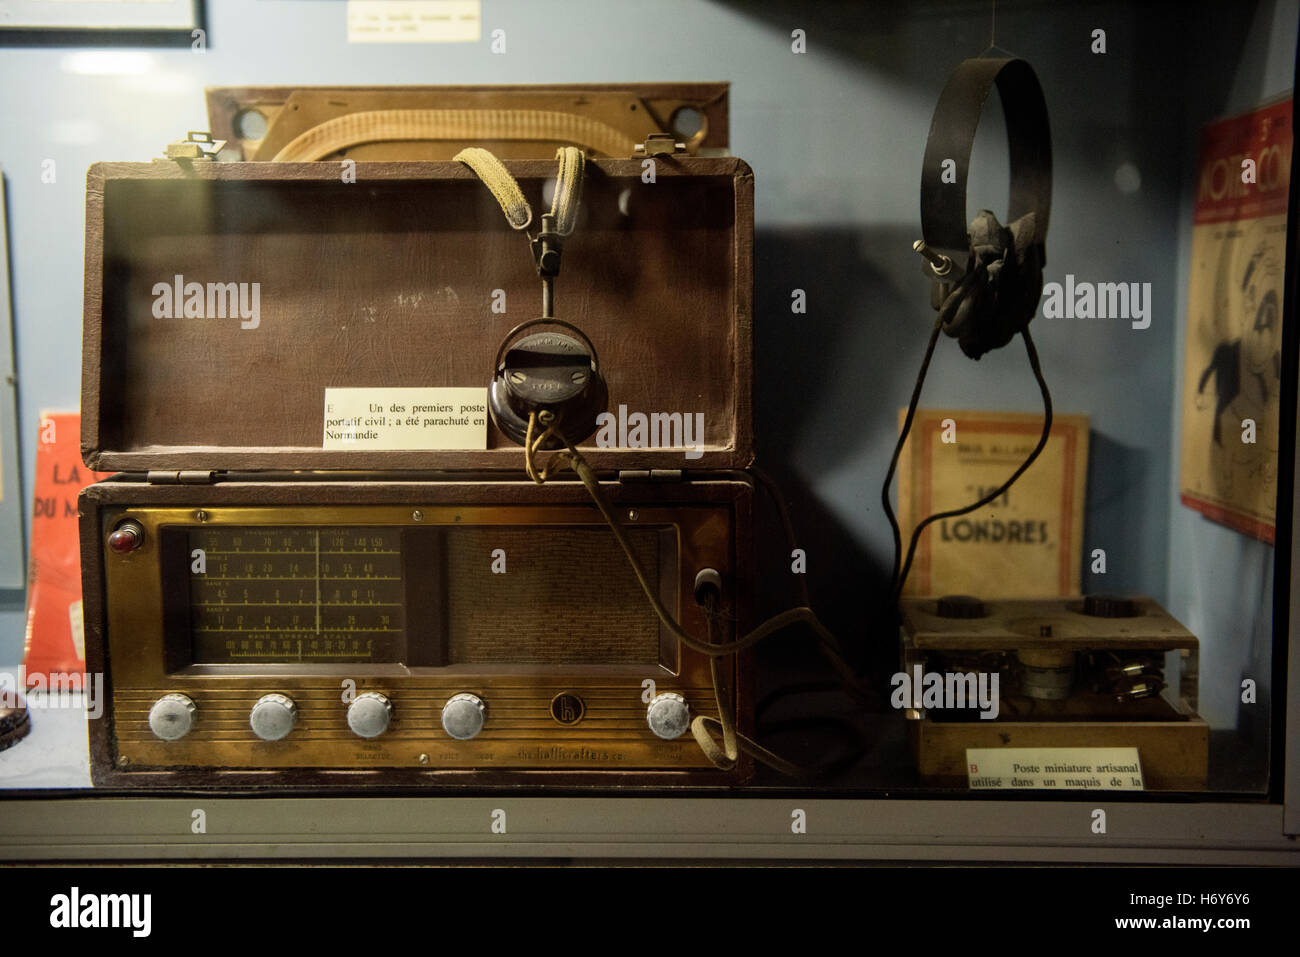 Resistance Museum, Castellane,Alpes de Haute Provence, France. Sept 2016. A wonderful museum celebrating the French Resistance.. Radio set used by the resistance. Stock Photo